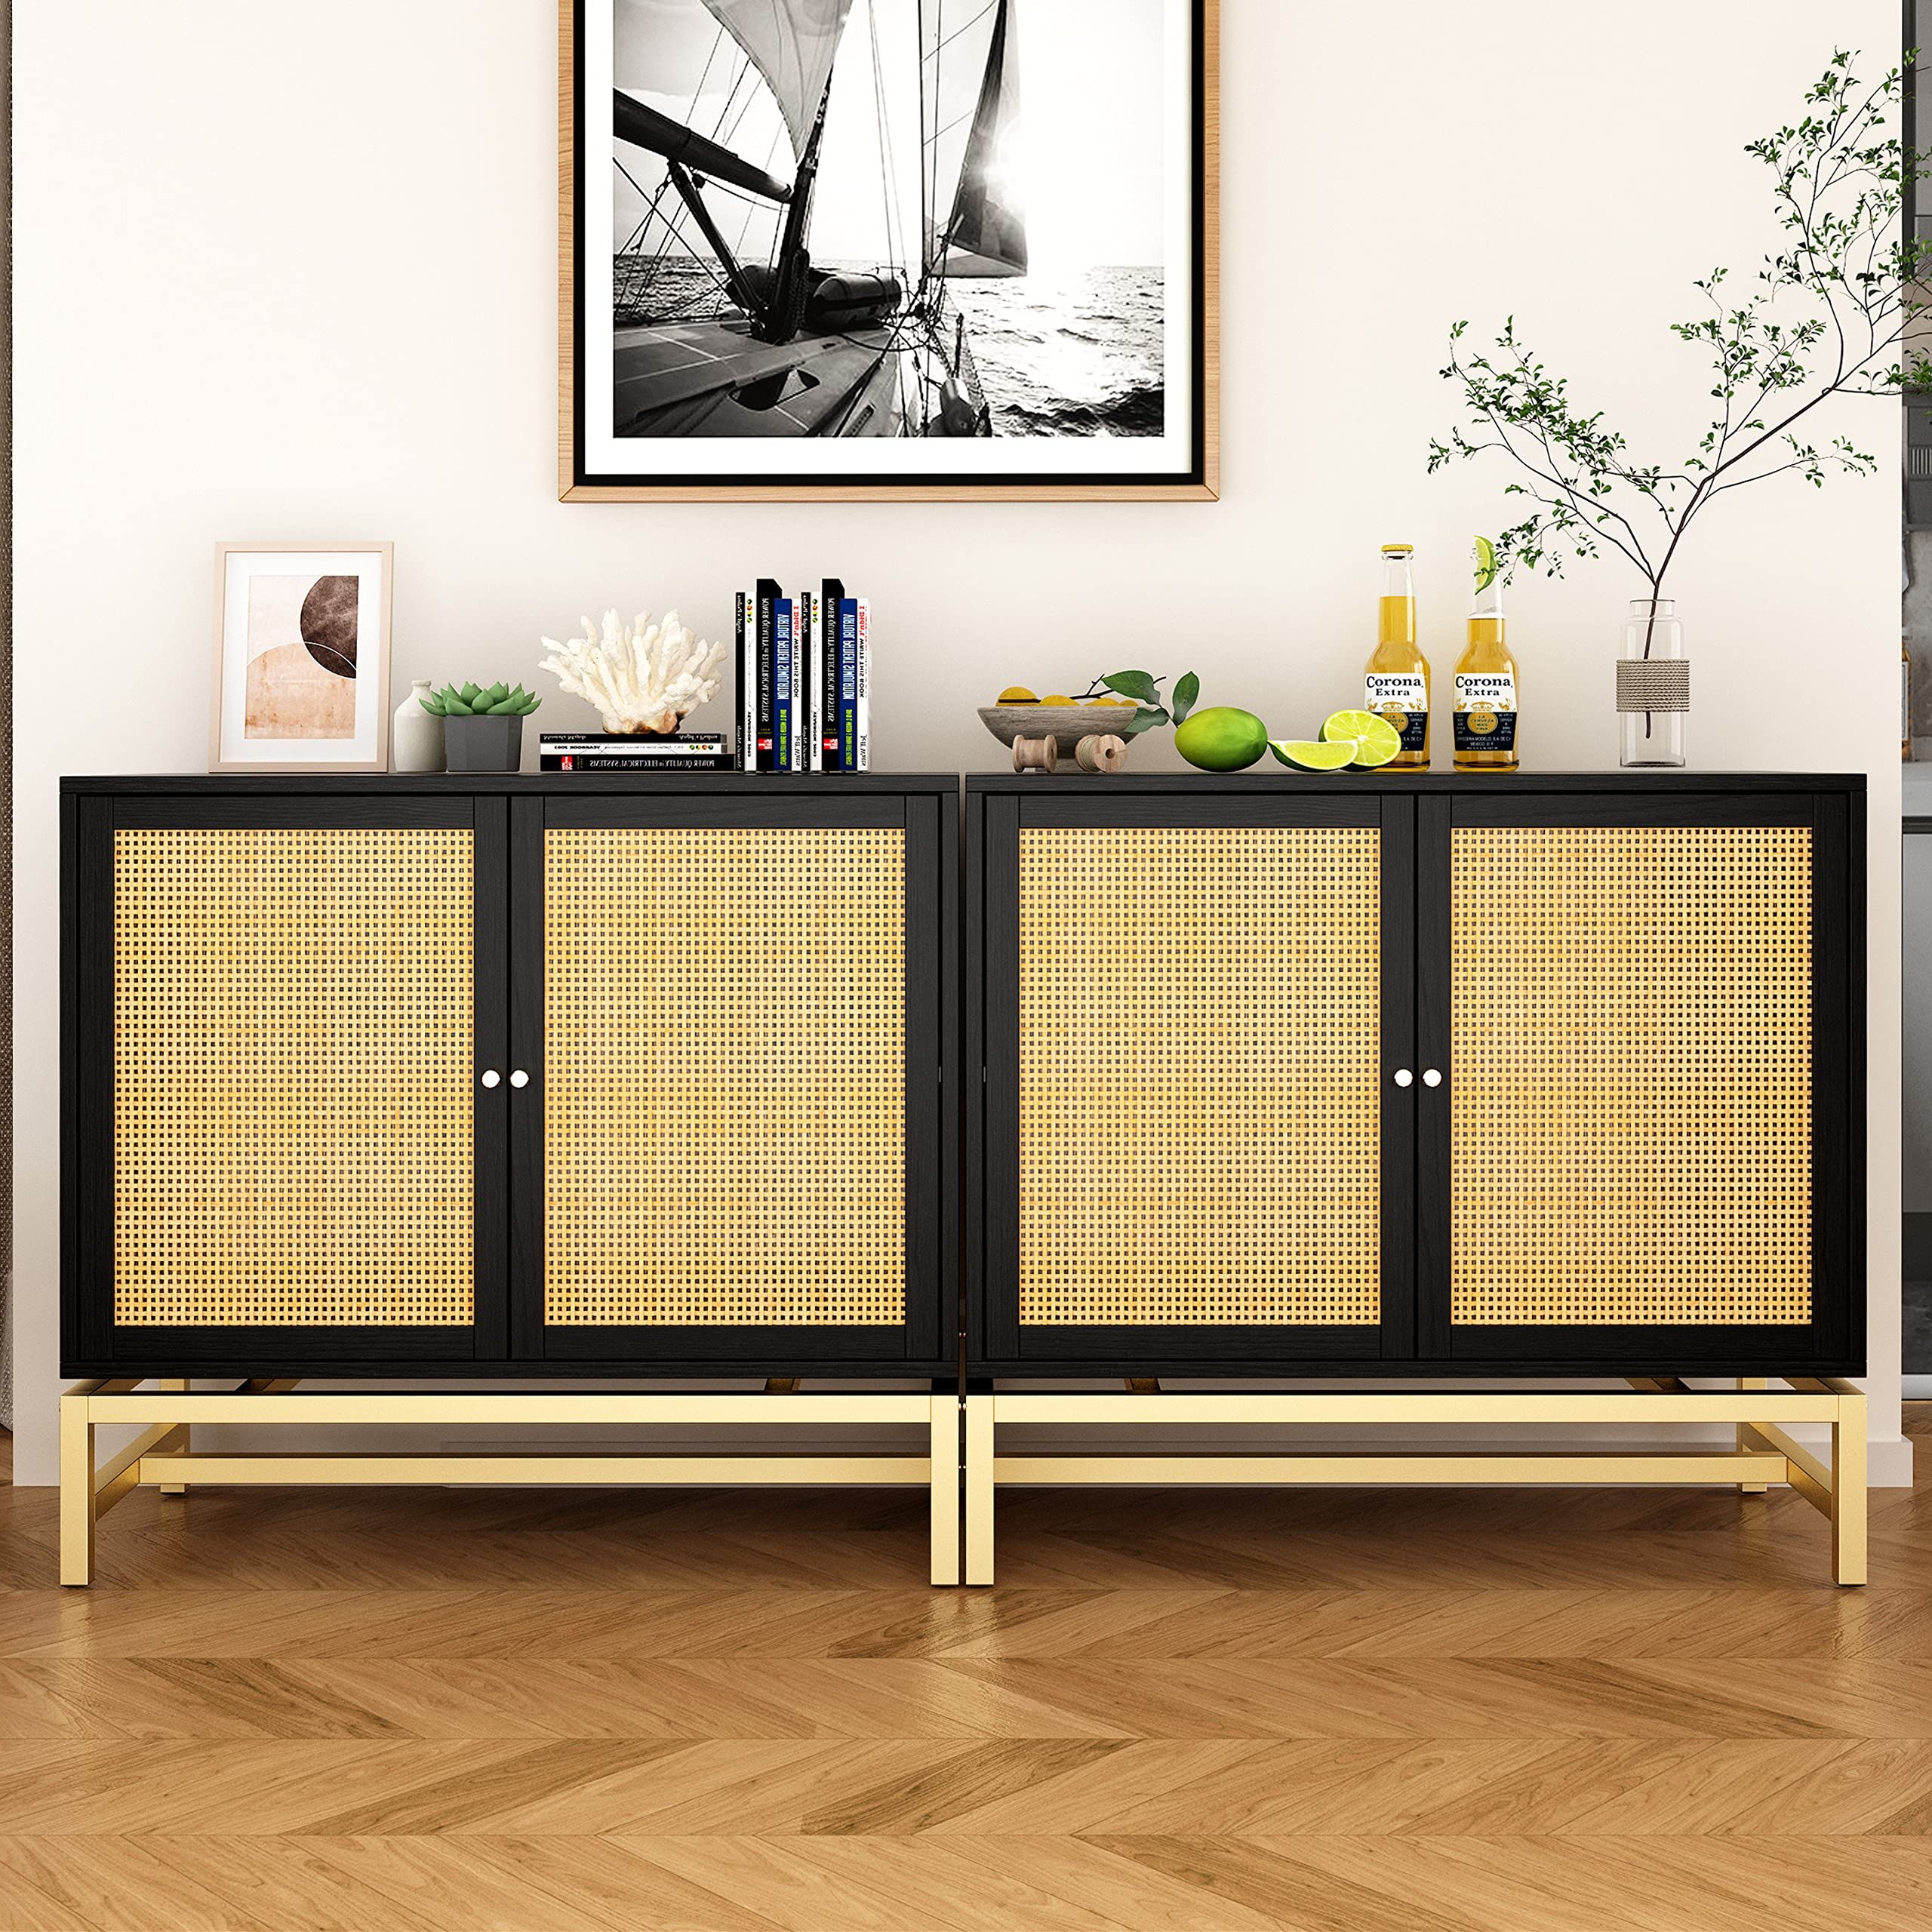 Rattan Buffet Tables Intended For Well Known Amazon: Modern Rattan Buffet Sideboard Floor Stand Storage Cabinet With  Natural Rattan Doors And Gold Metal Base Wood Sidrboard Accent Cabinet  Console Table For Living Room Bedroom（black 2 Pack） : Home & Kitchen (View 6 of 10)